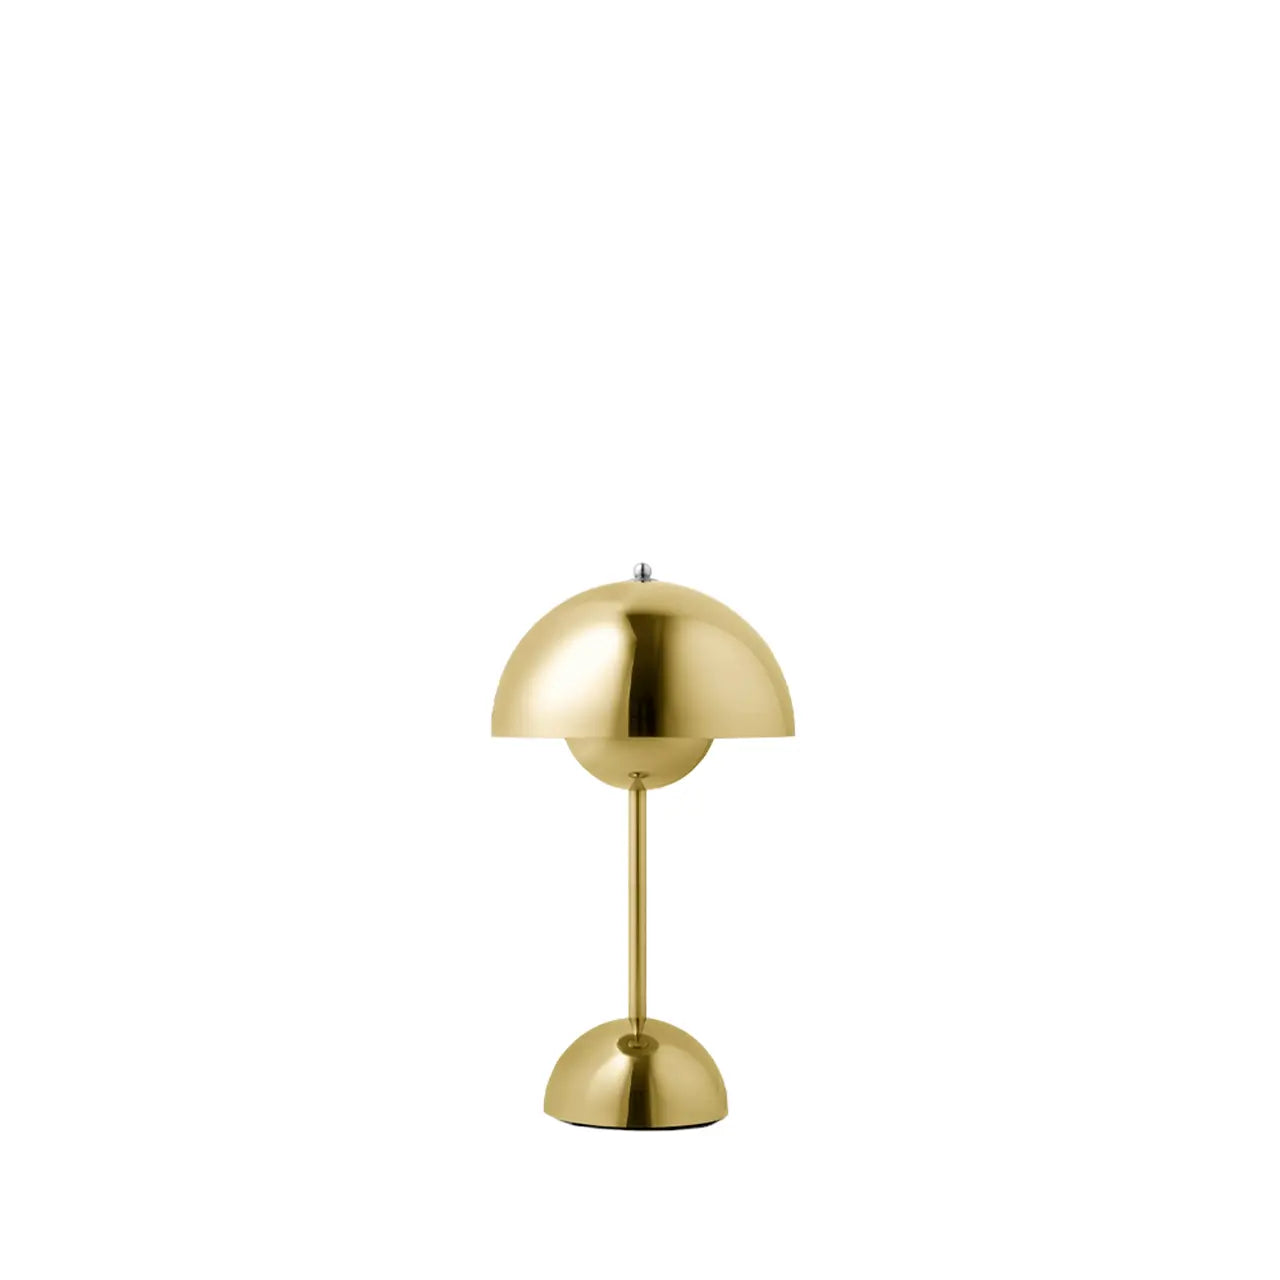 Flowerpot Draagbare lamp | goud | &Tradition | Design | Shop | Anneke Crauwels Home